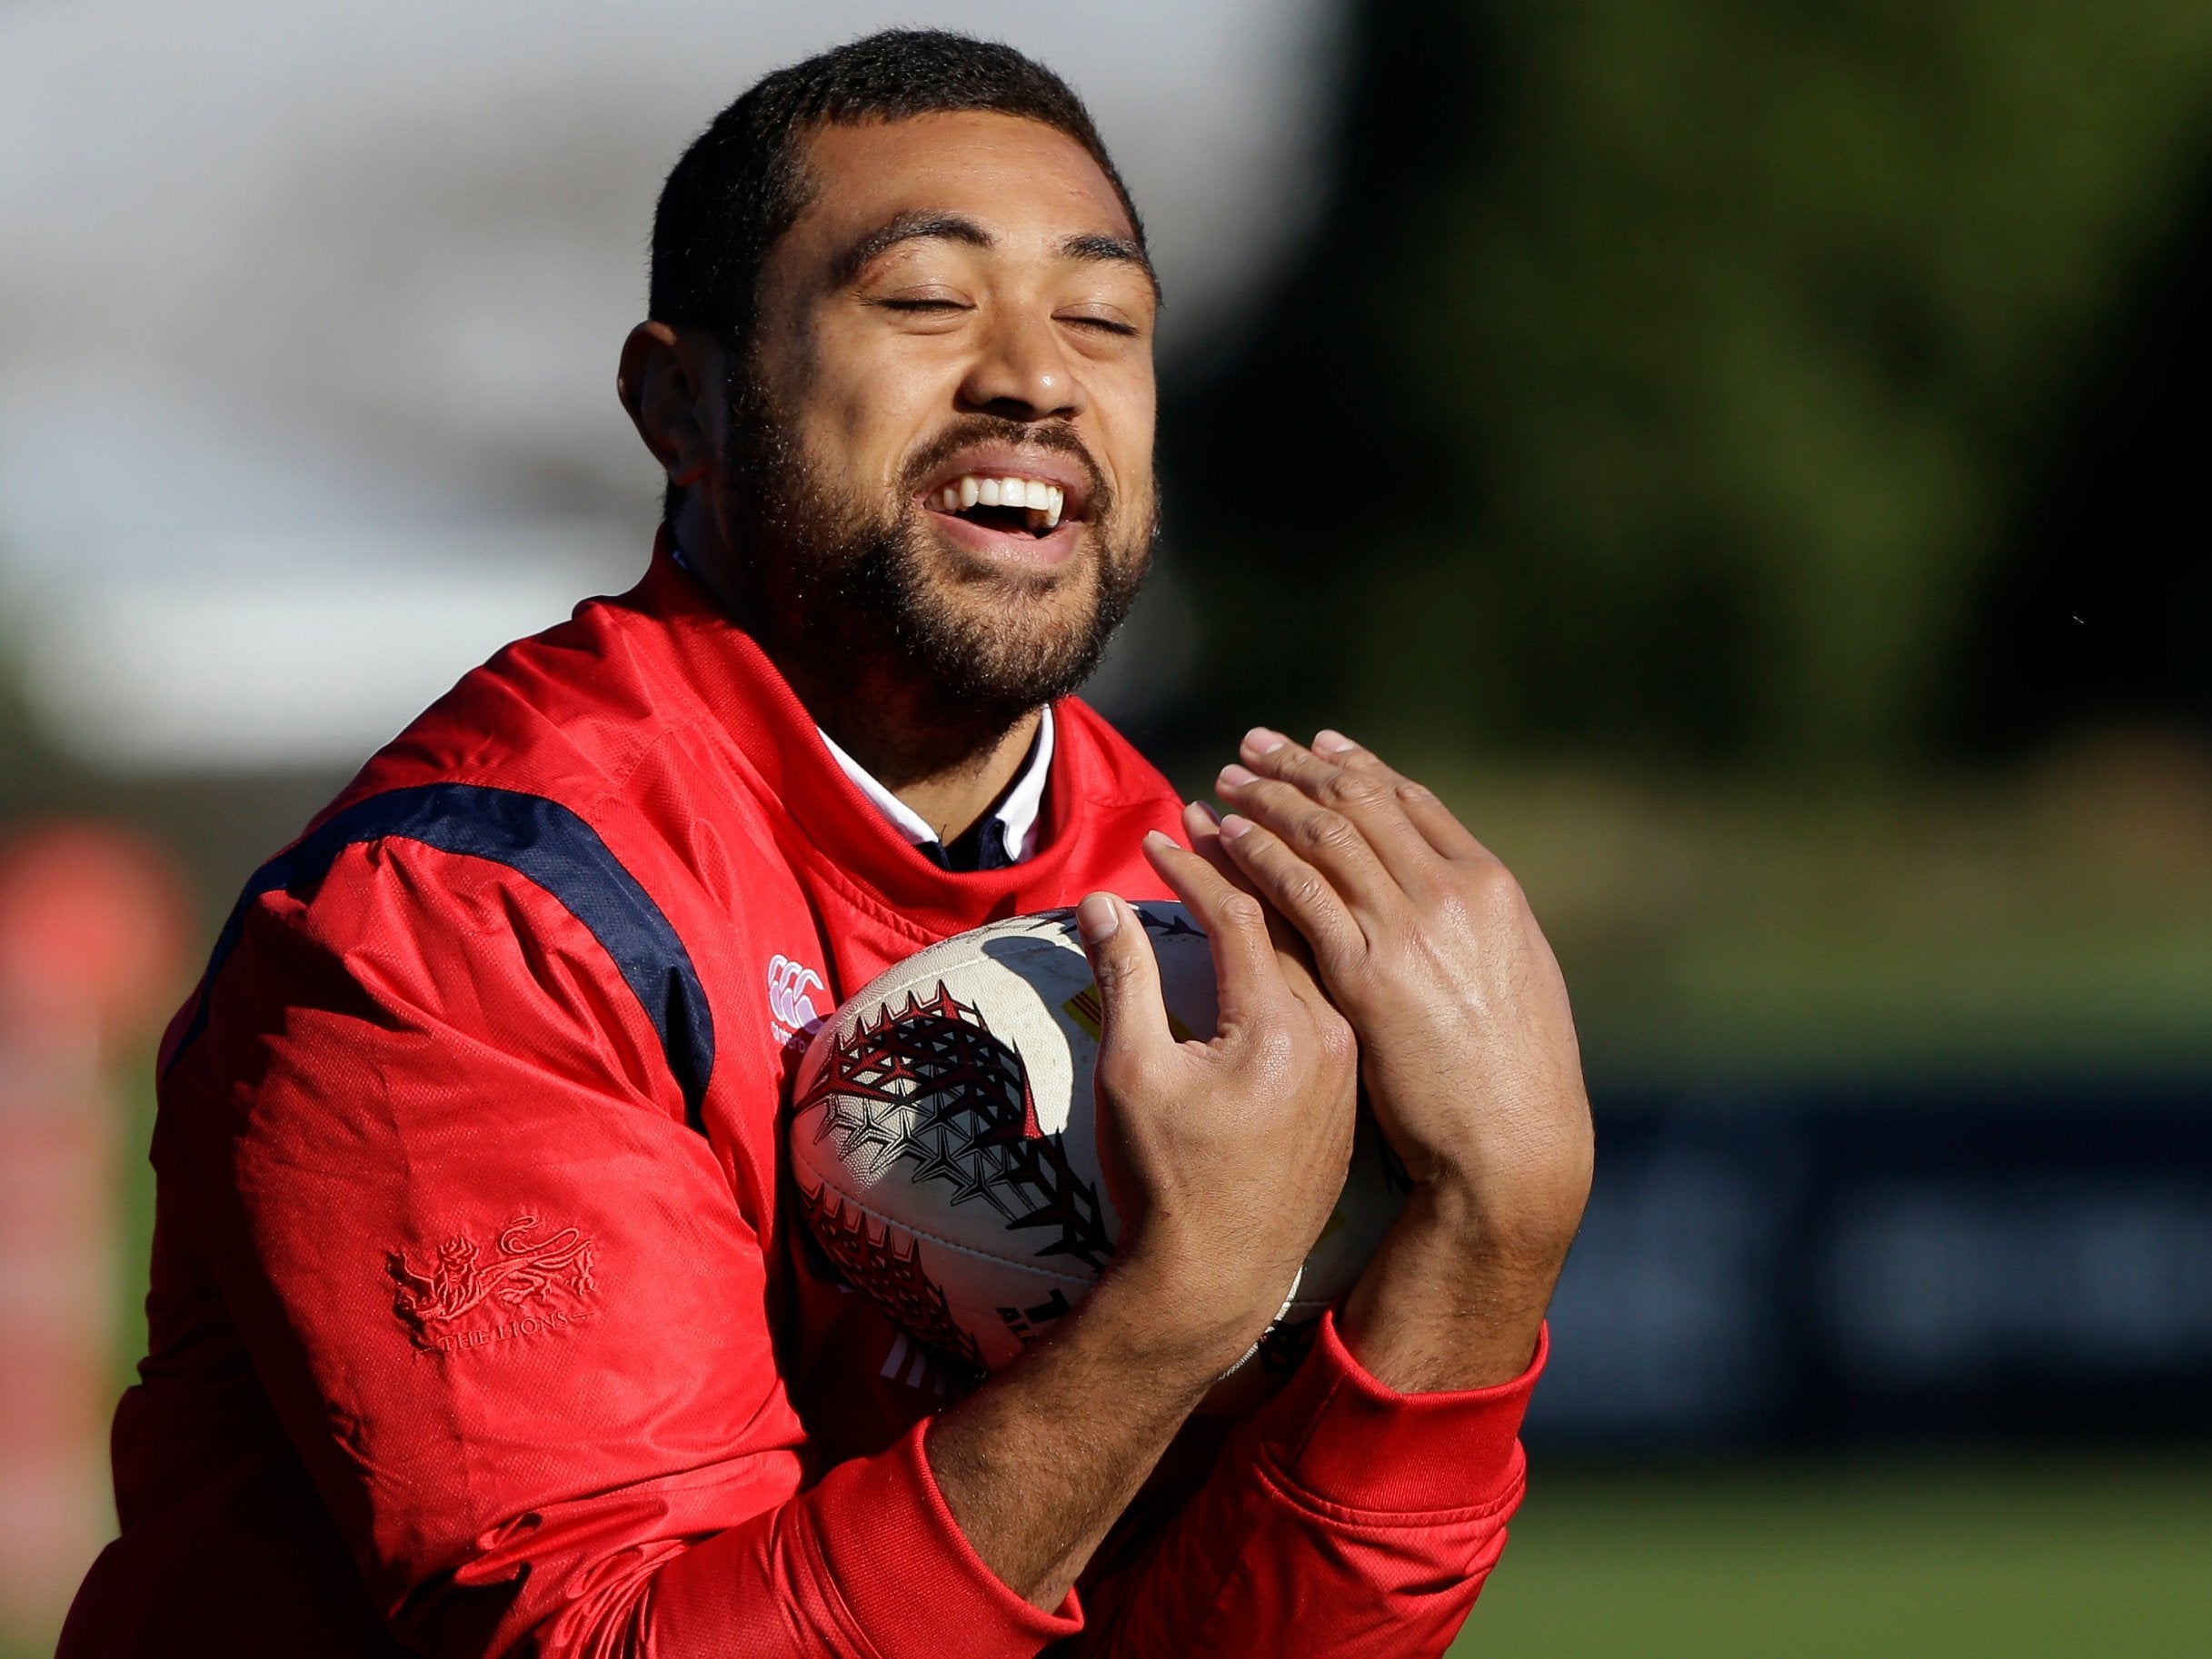 Taulupe Faletau has had a second operation on his broken arm